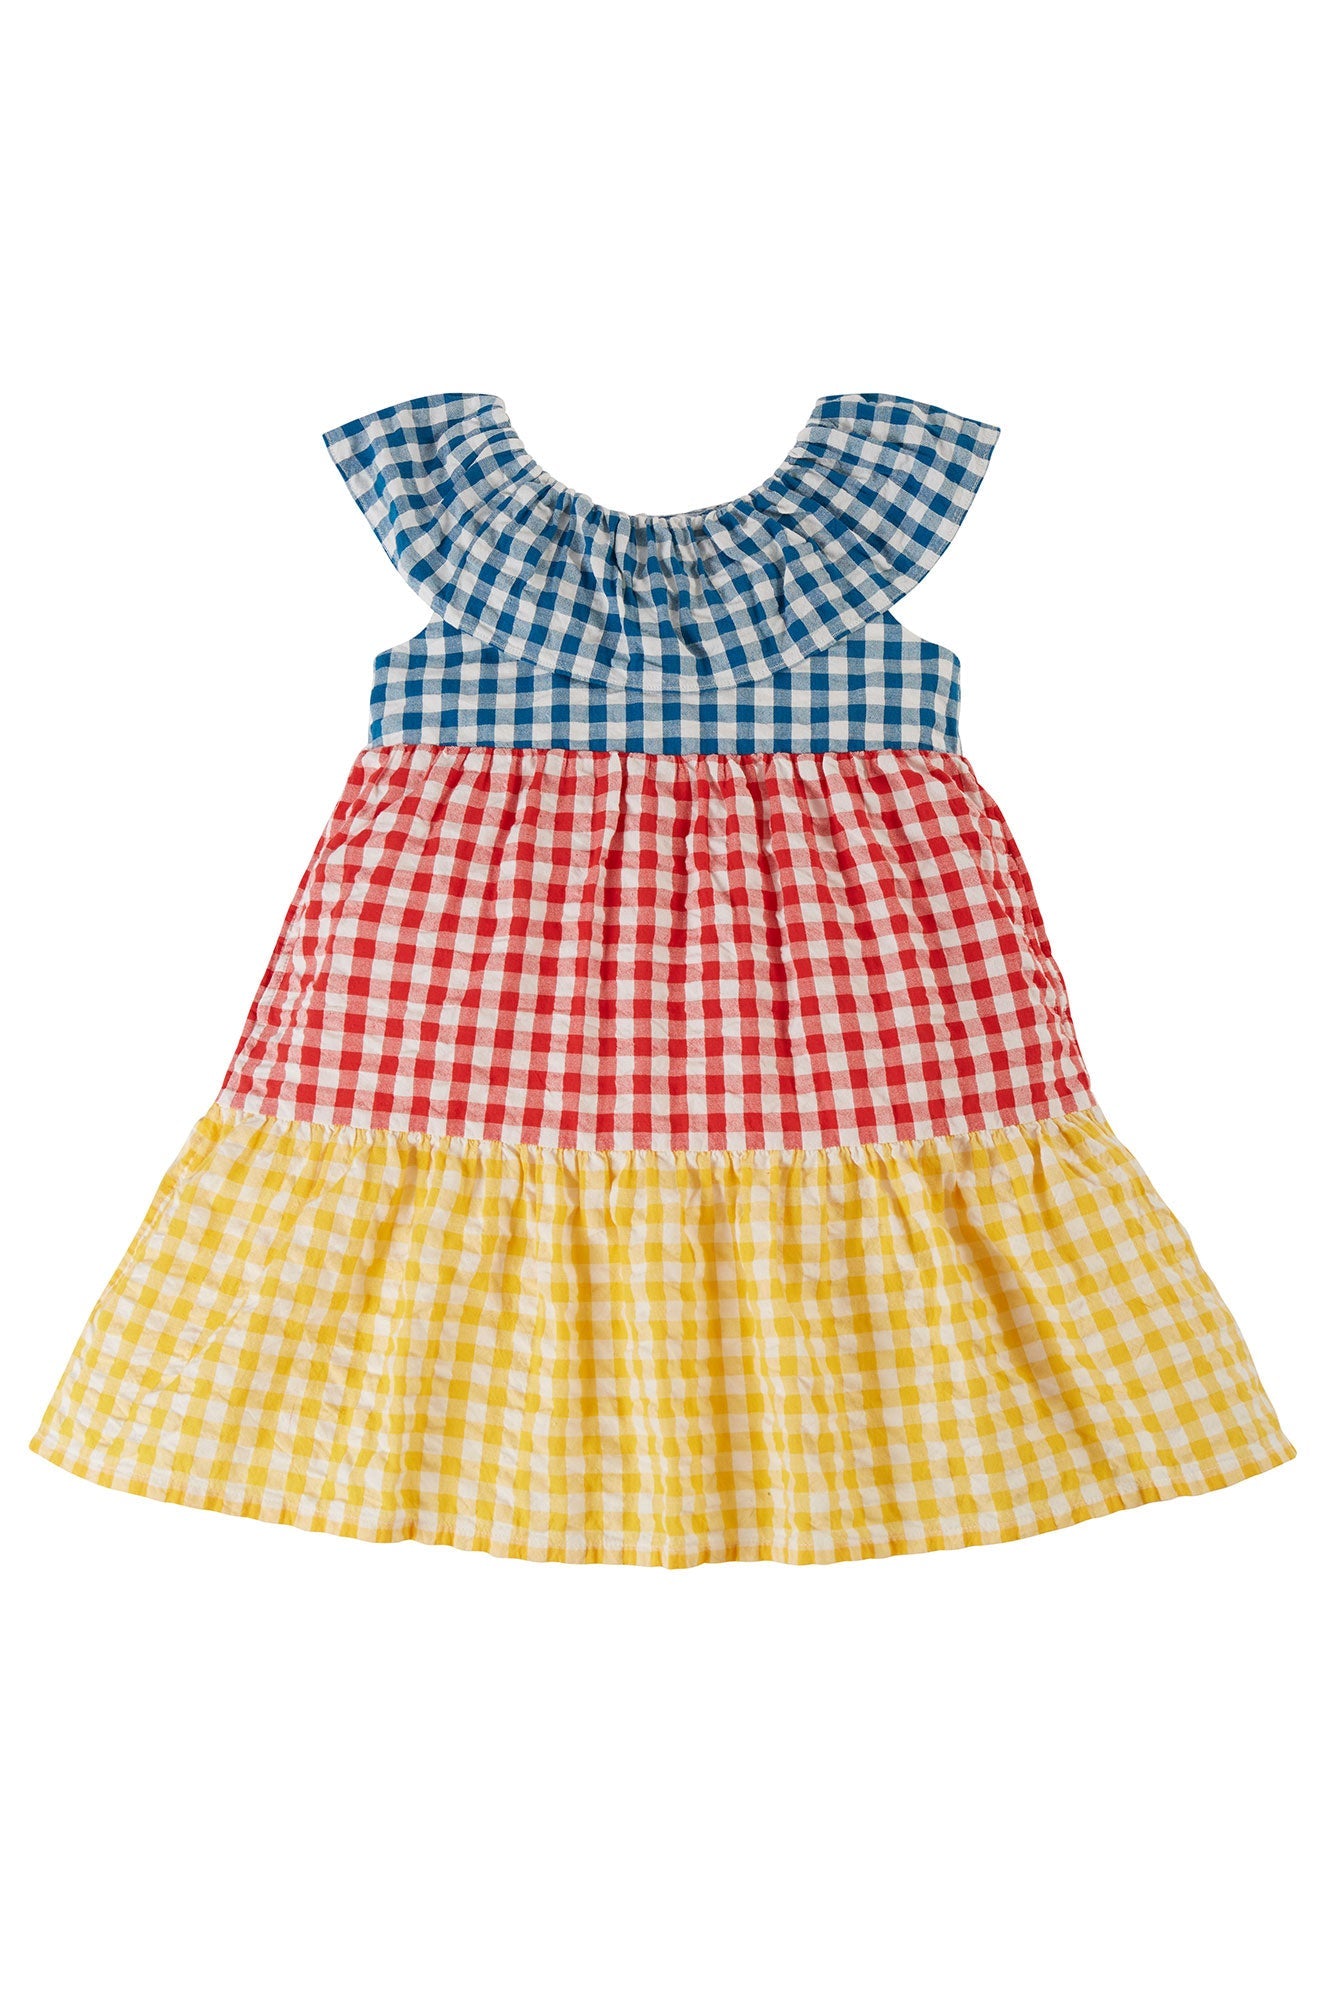 Frugi Nina Ruffle Dress in Hotch Potch Check-Kids-Ohh! By Gum - Shop Sustainable